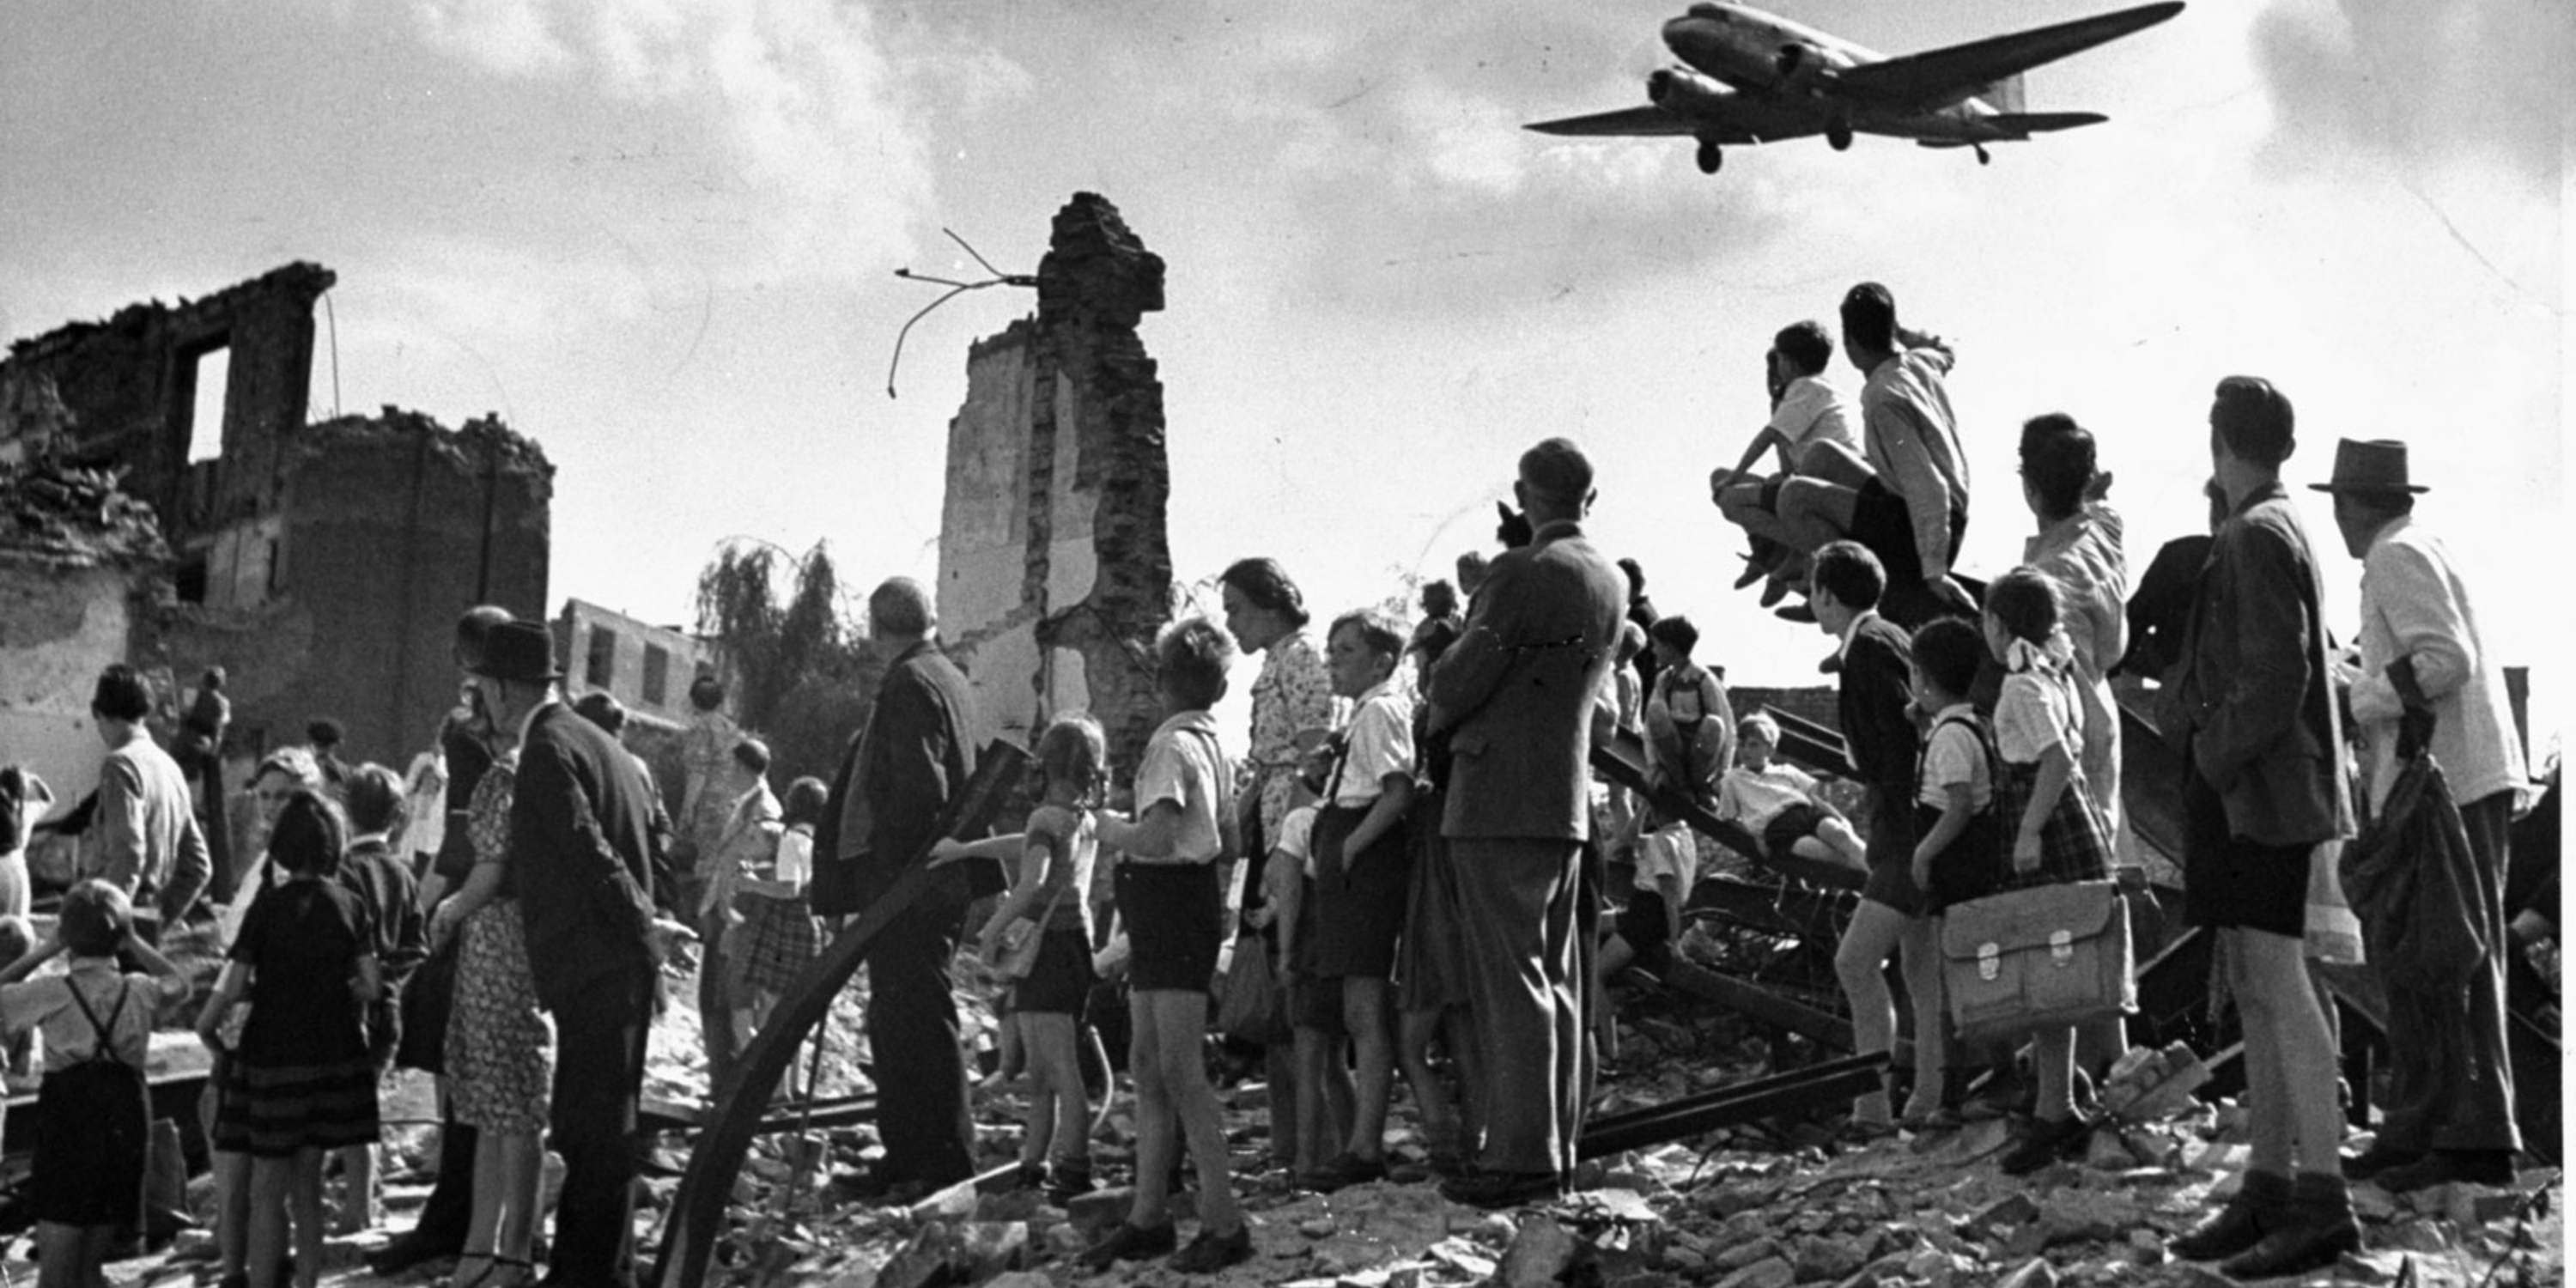 West Berliners stand amid the rubble of WWII and watch U.S. Air Force transport planes land at Templehof Airport during the Berlin Airlift in 1948. 